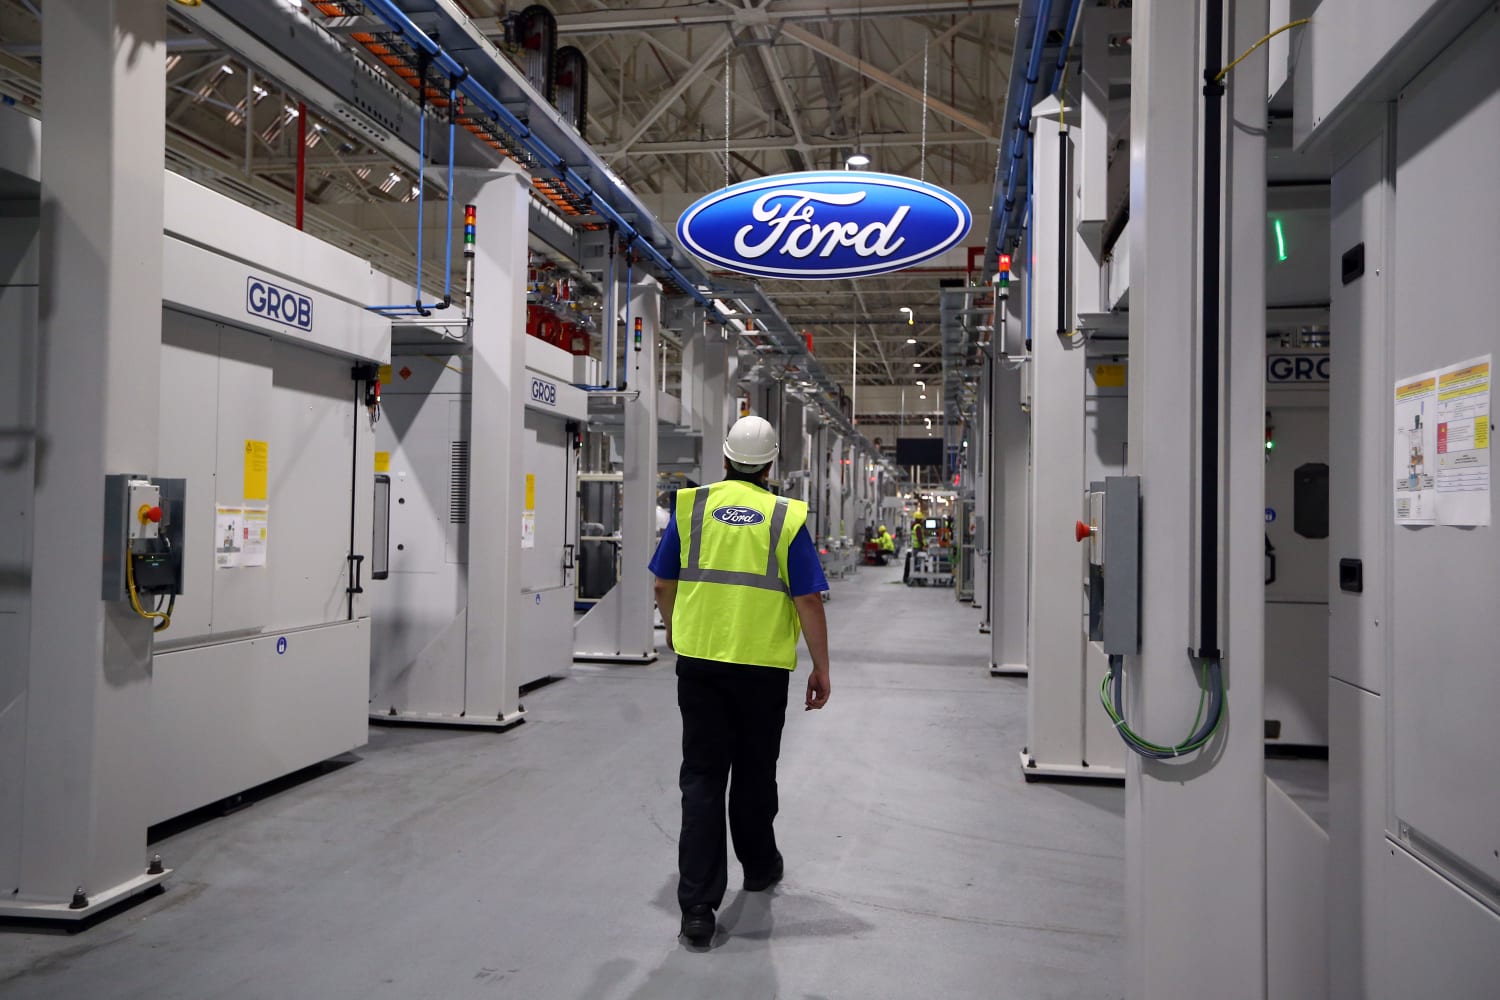 Ford Prepares for Mass Layoffs After Losing $1 Billion to Trump's Trade Tariffs, Report Says